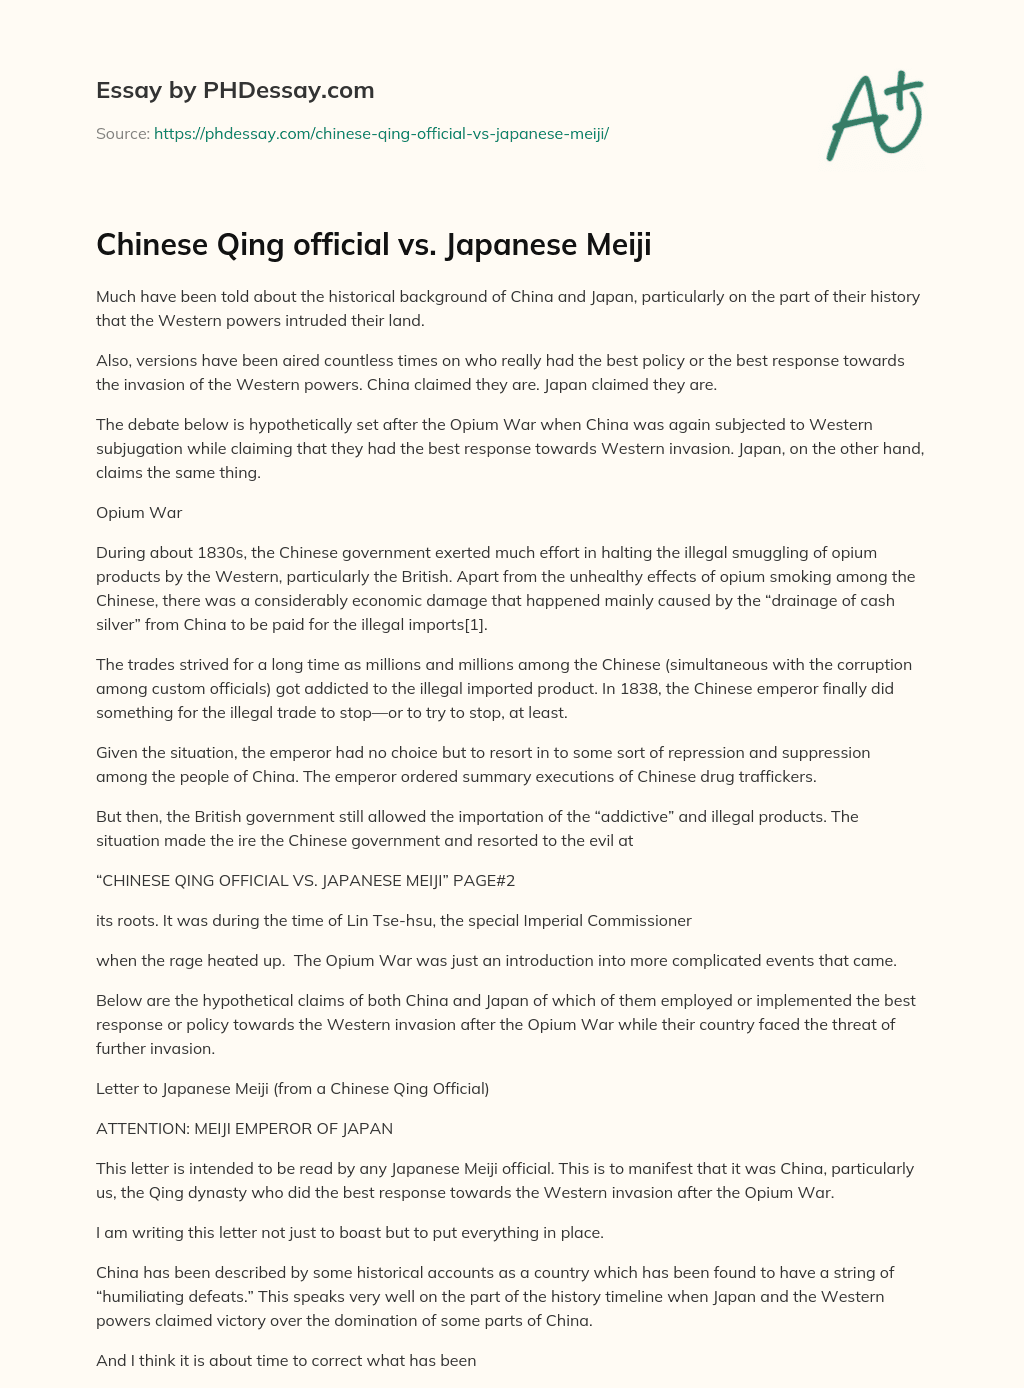 Chinese Qing official  vs. Japanese Meiji essay